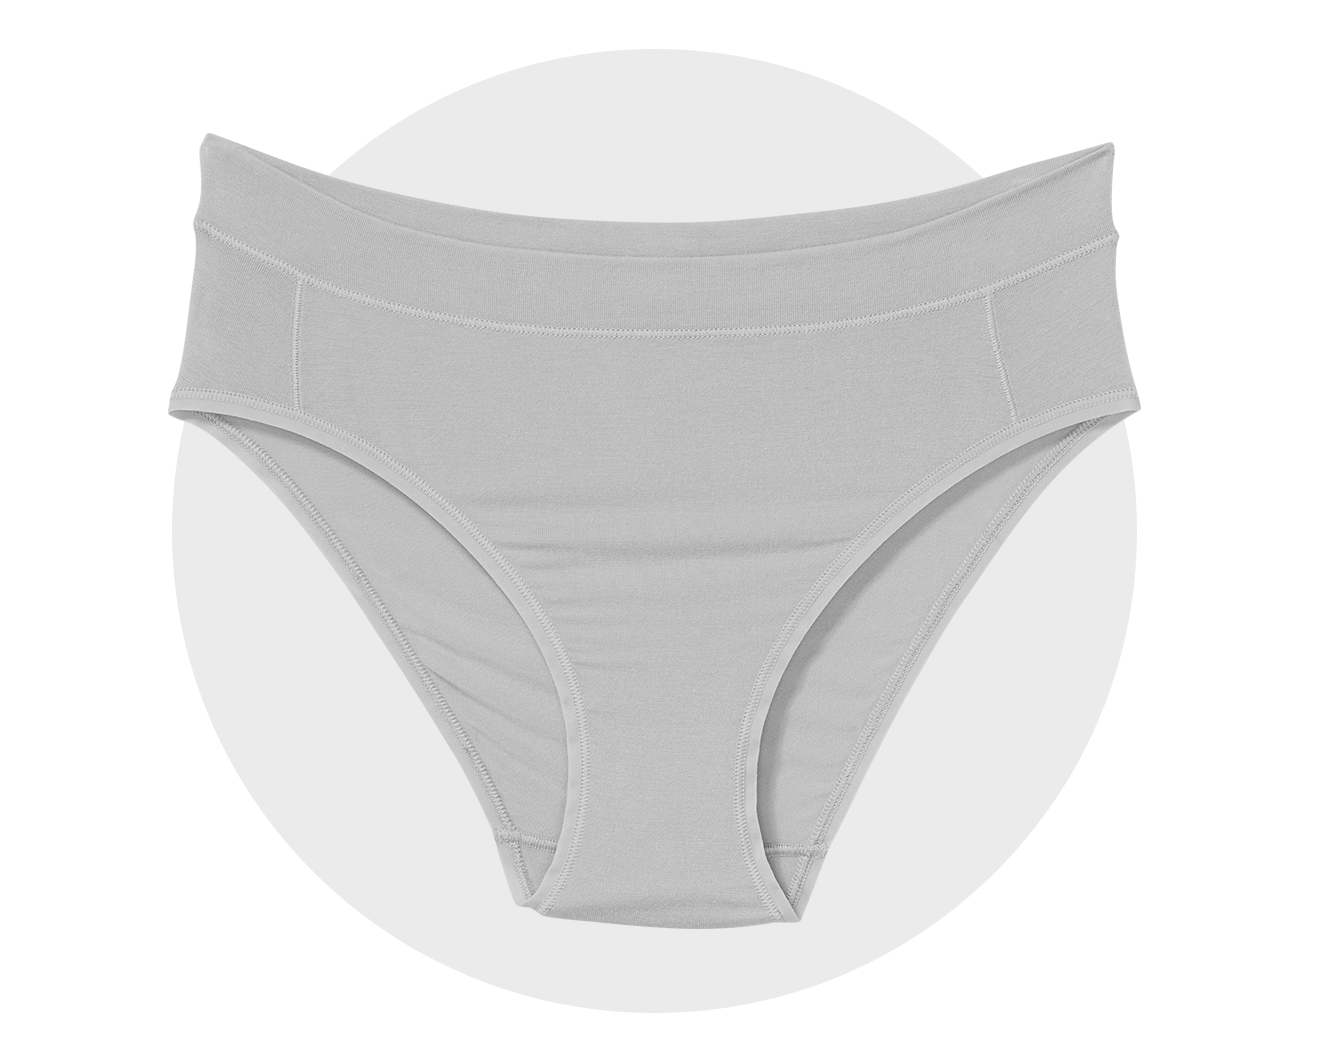 D'chica Pack of 2 Eco-friendly Anti Microbial Lining Period Panties Fo